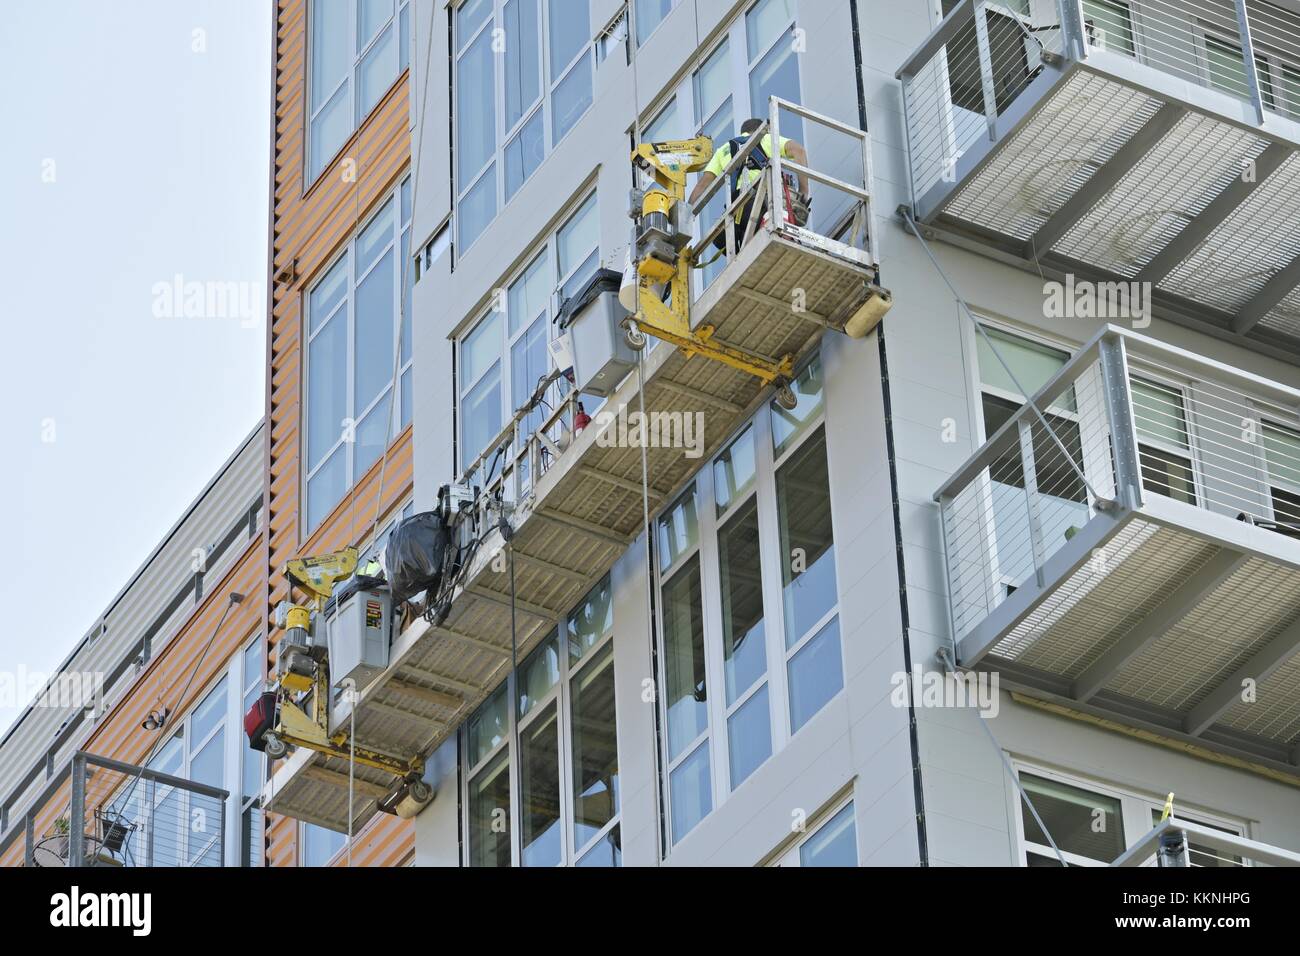 GREEN BAY, WISCONSIN - AUGUST 12, 2017: window cleaners working on ther exterior of a building in a basket in Green Bay, Wisconsin Stock Photo